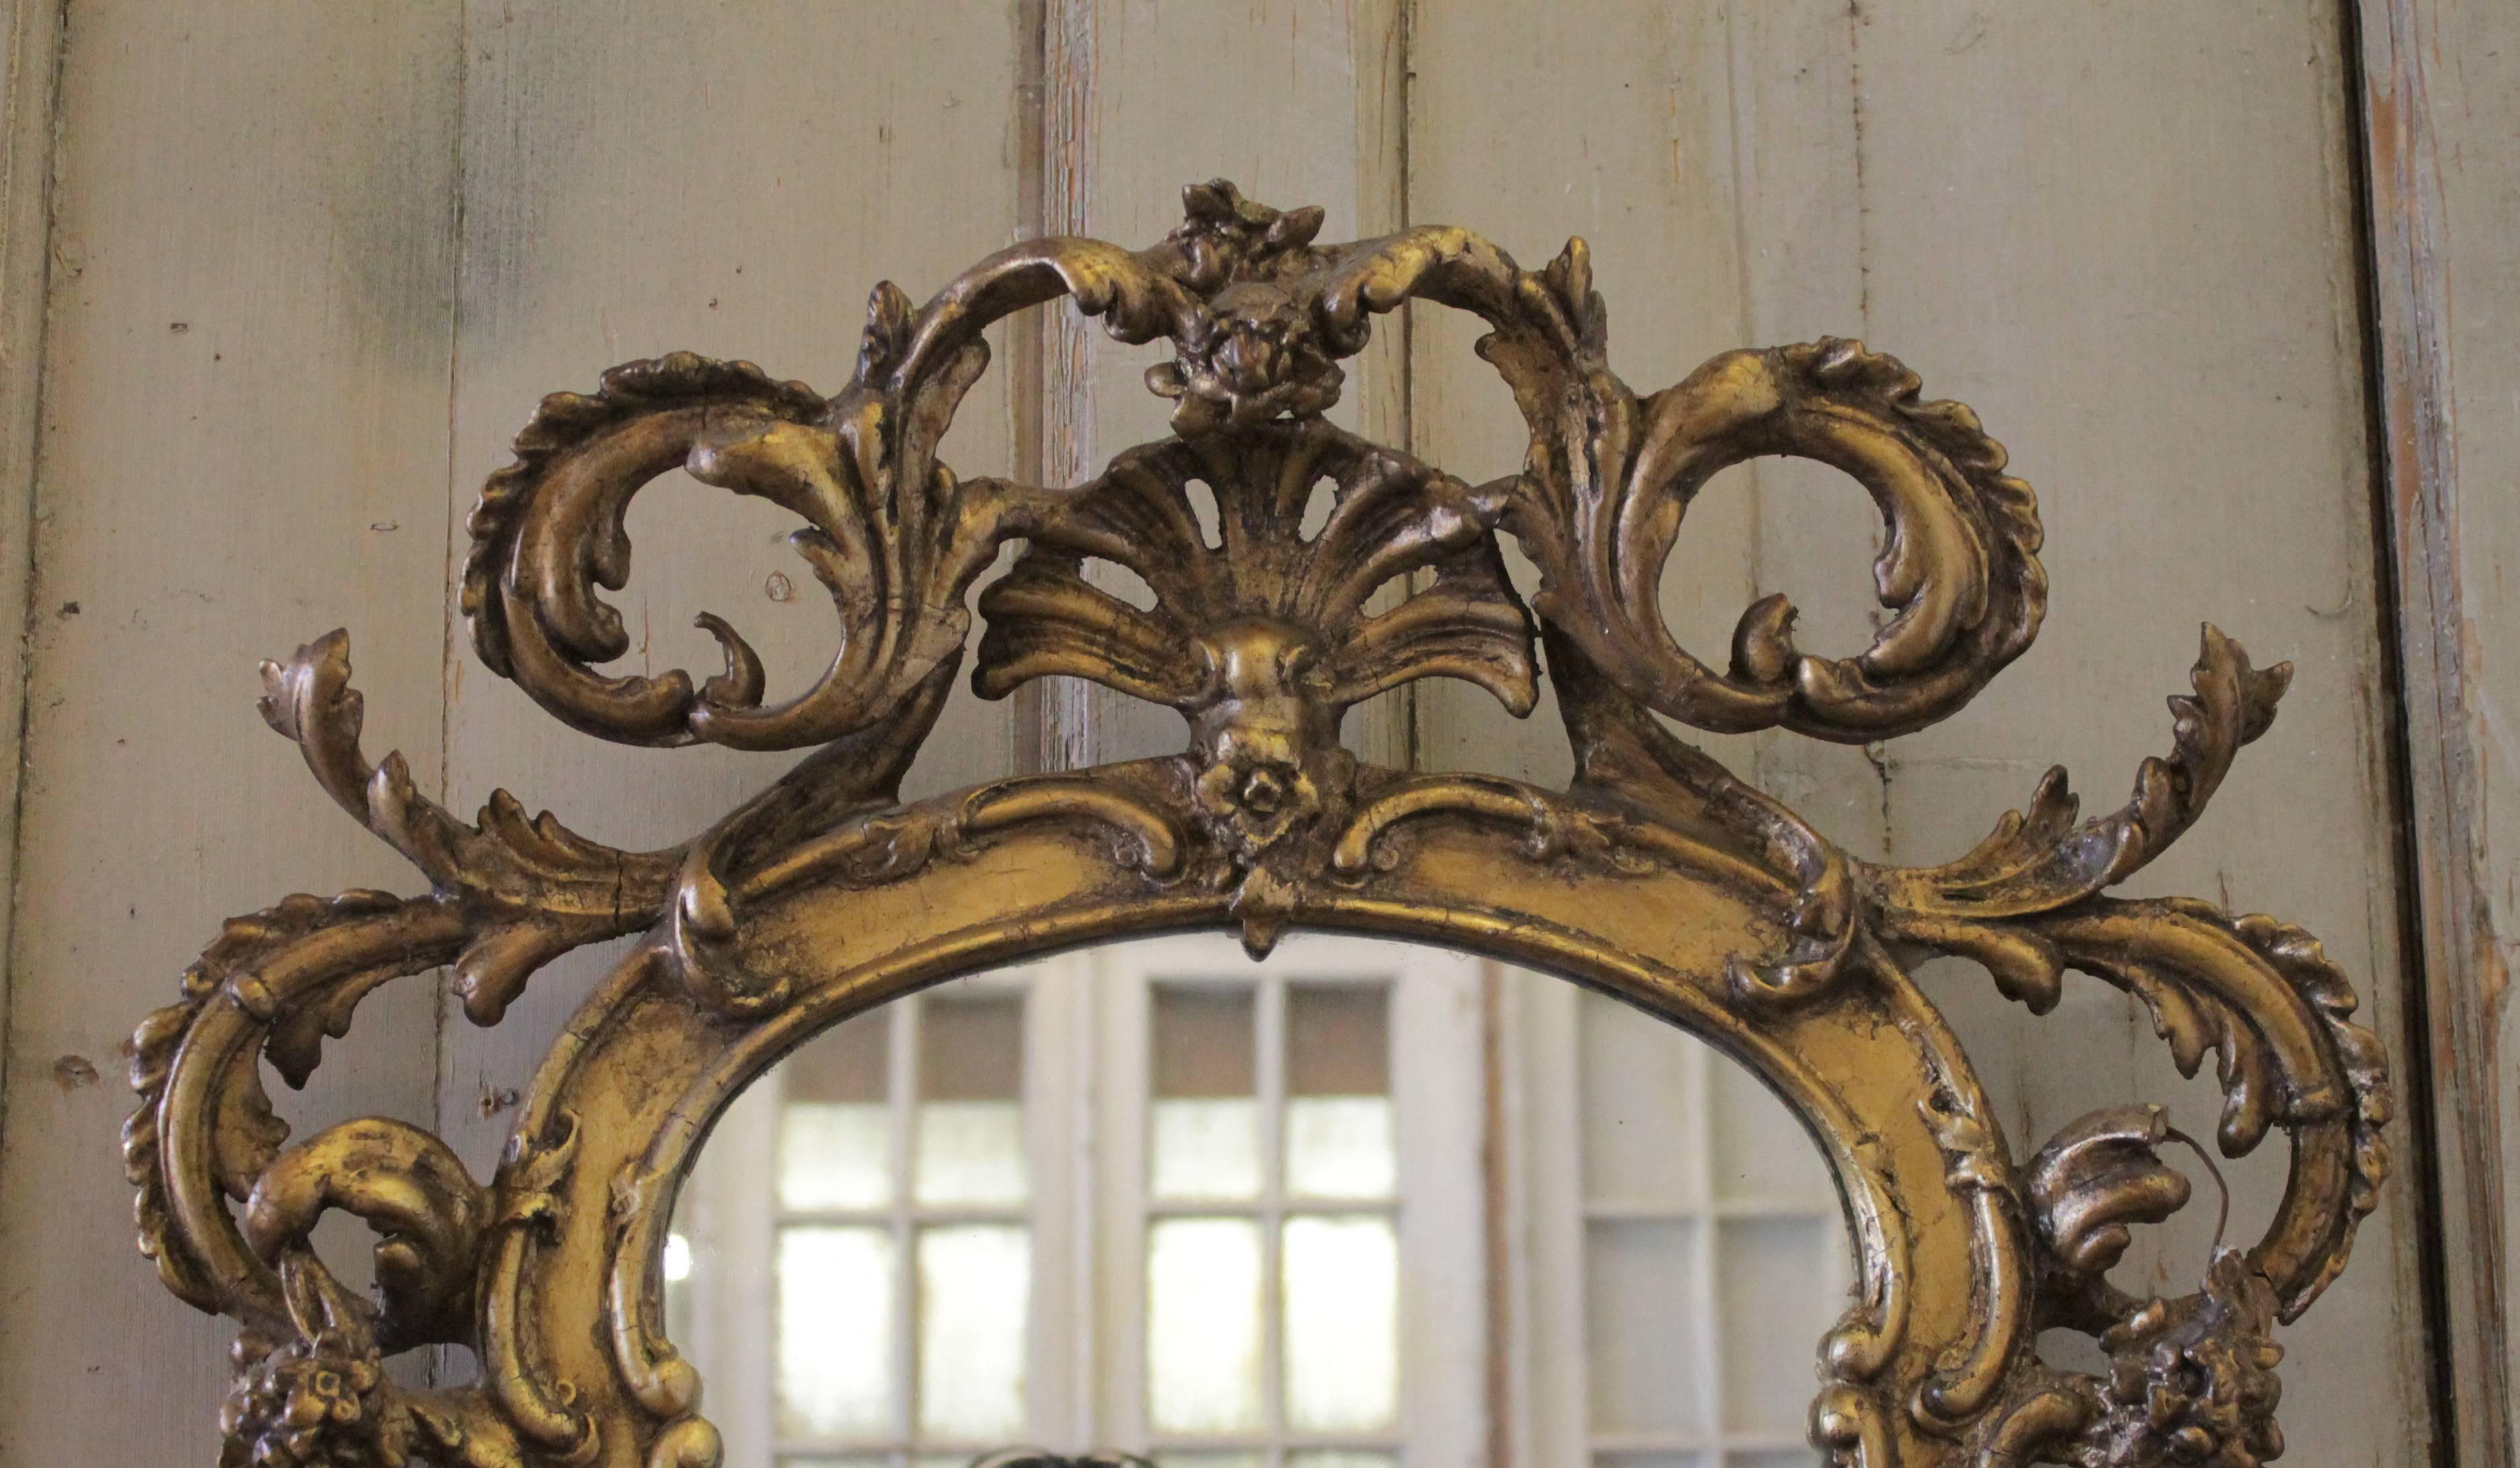 Grand 18th century French giltwood mirrors with scrolls and girandoles. These mirrors have the original mirror with subtle aging. You can see in the reflection of one photo, the small age spots. Made from wood and gesso, the mirror does have some